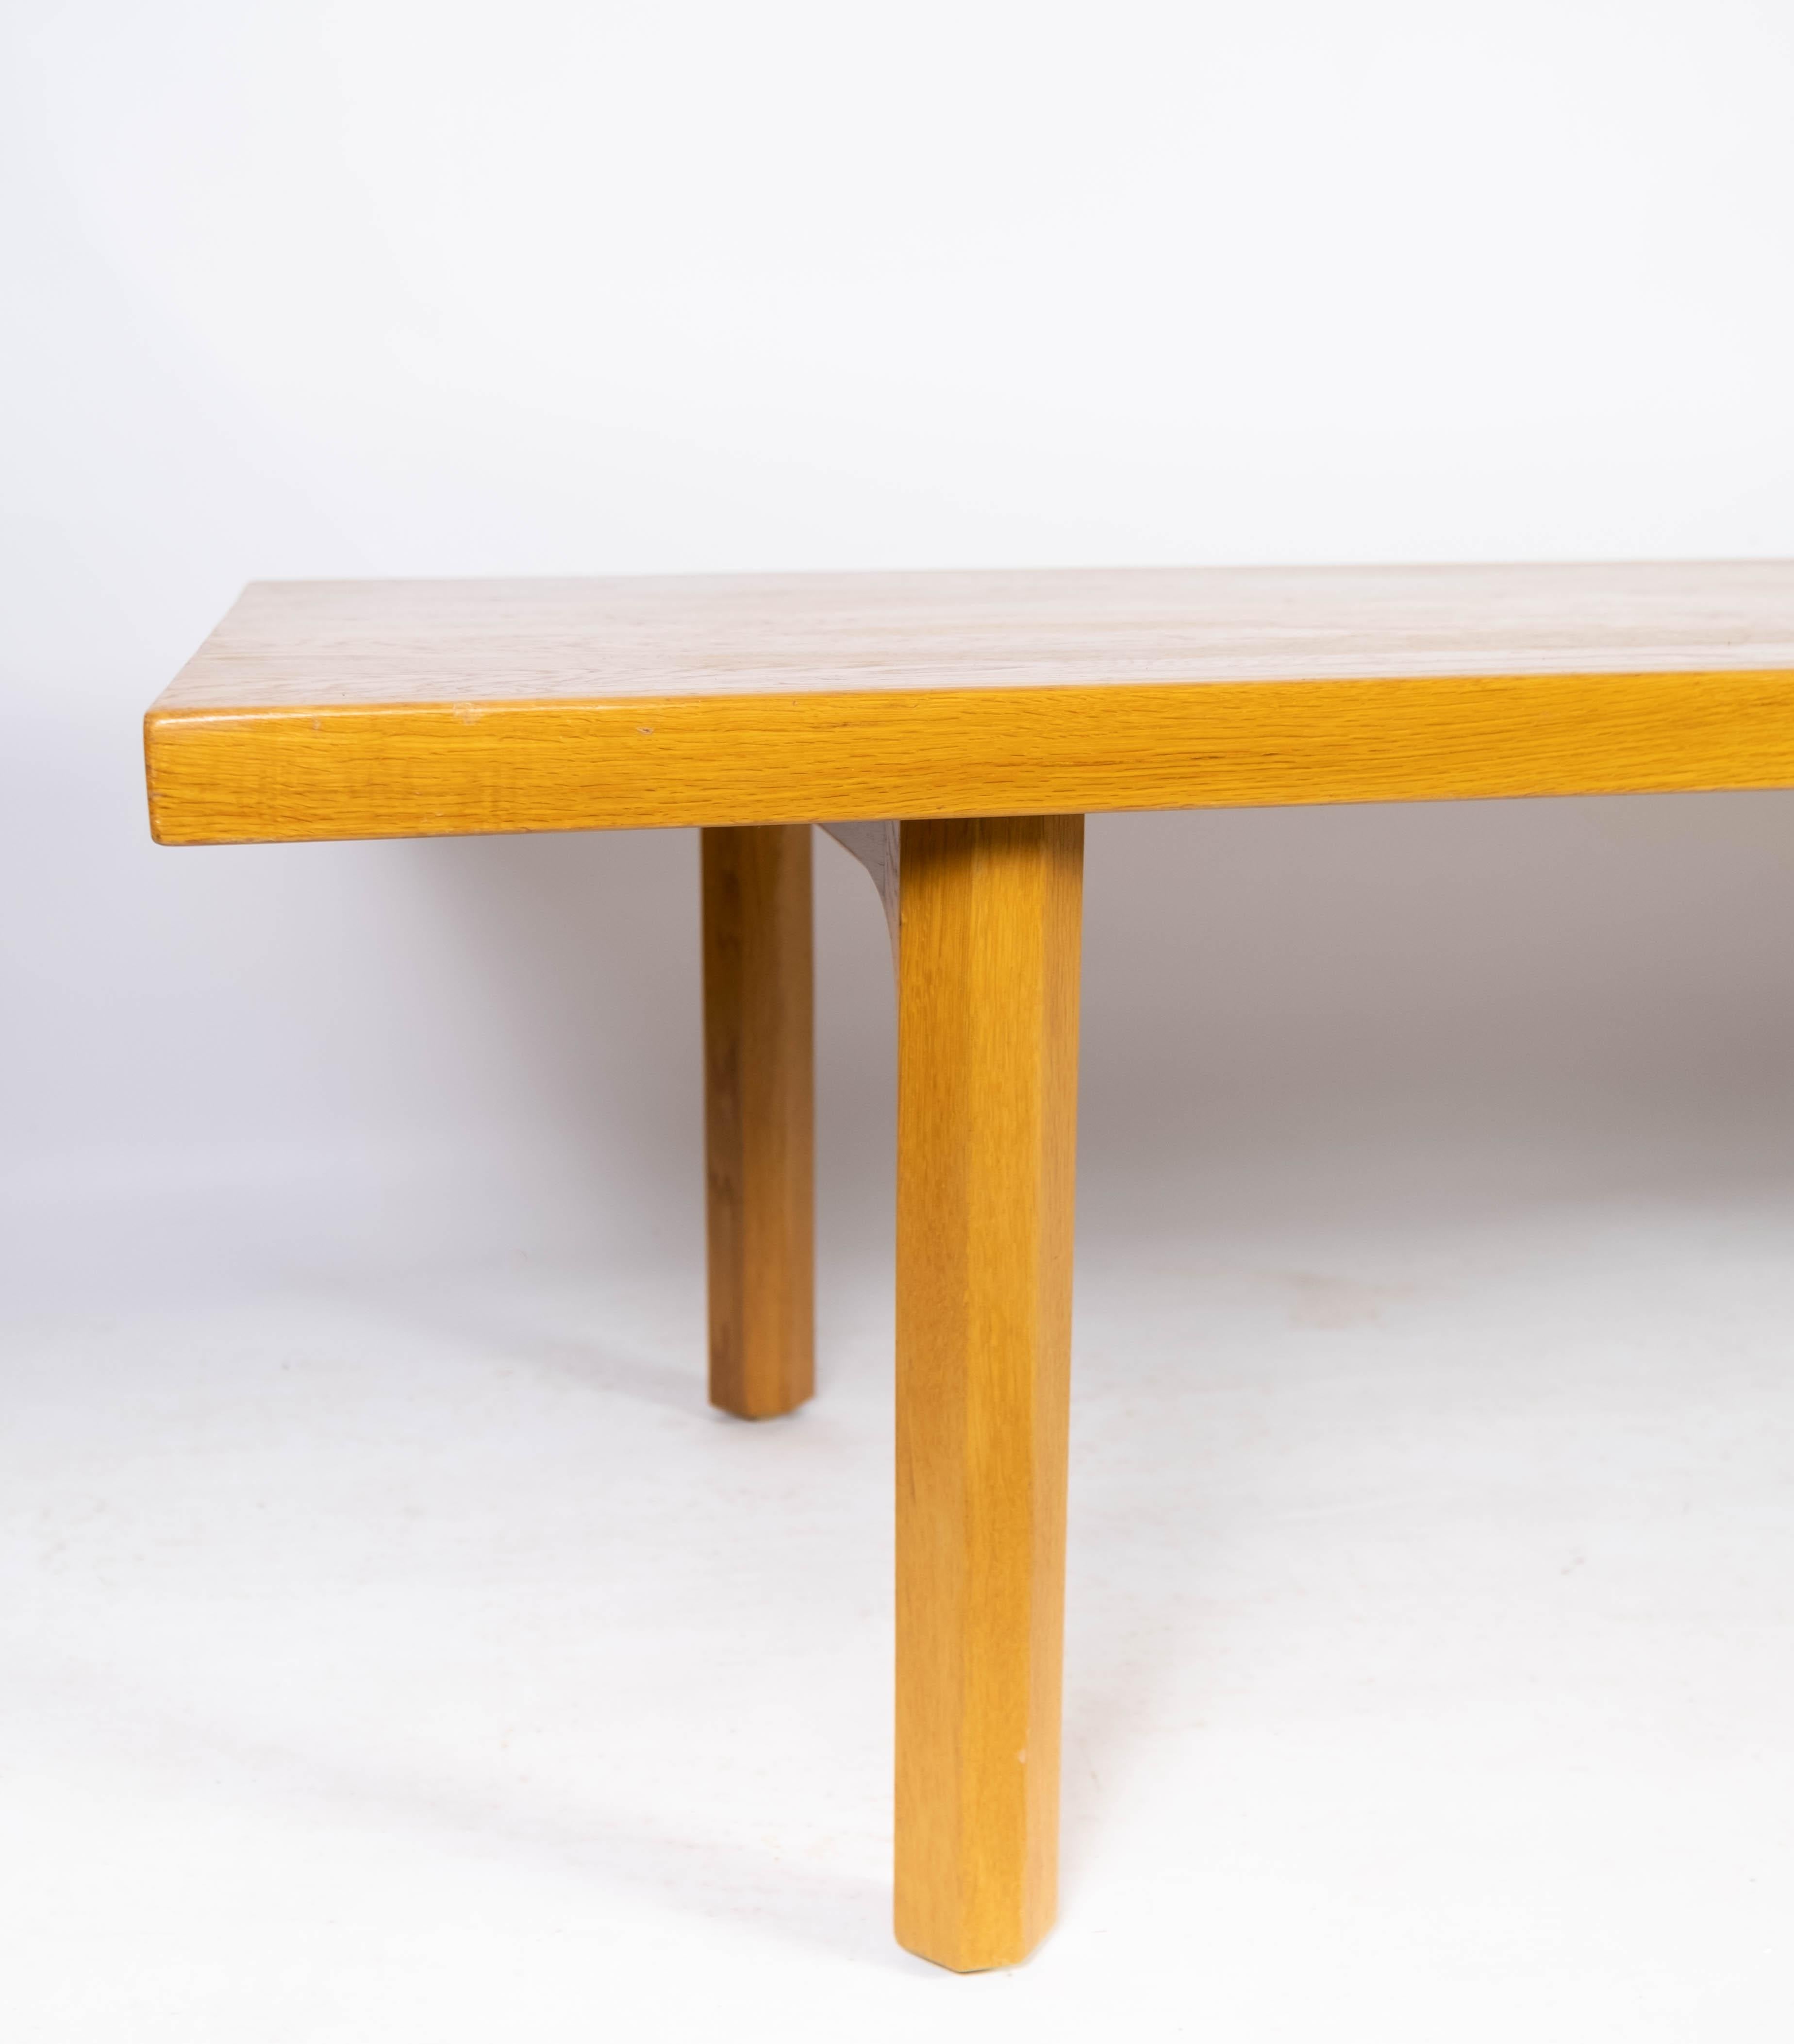 Coffee Table Made In Oak, Danish Design From 1960s In Good Condition For Sale In Lejre, DK